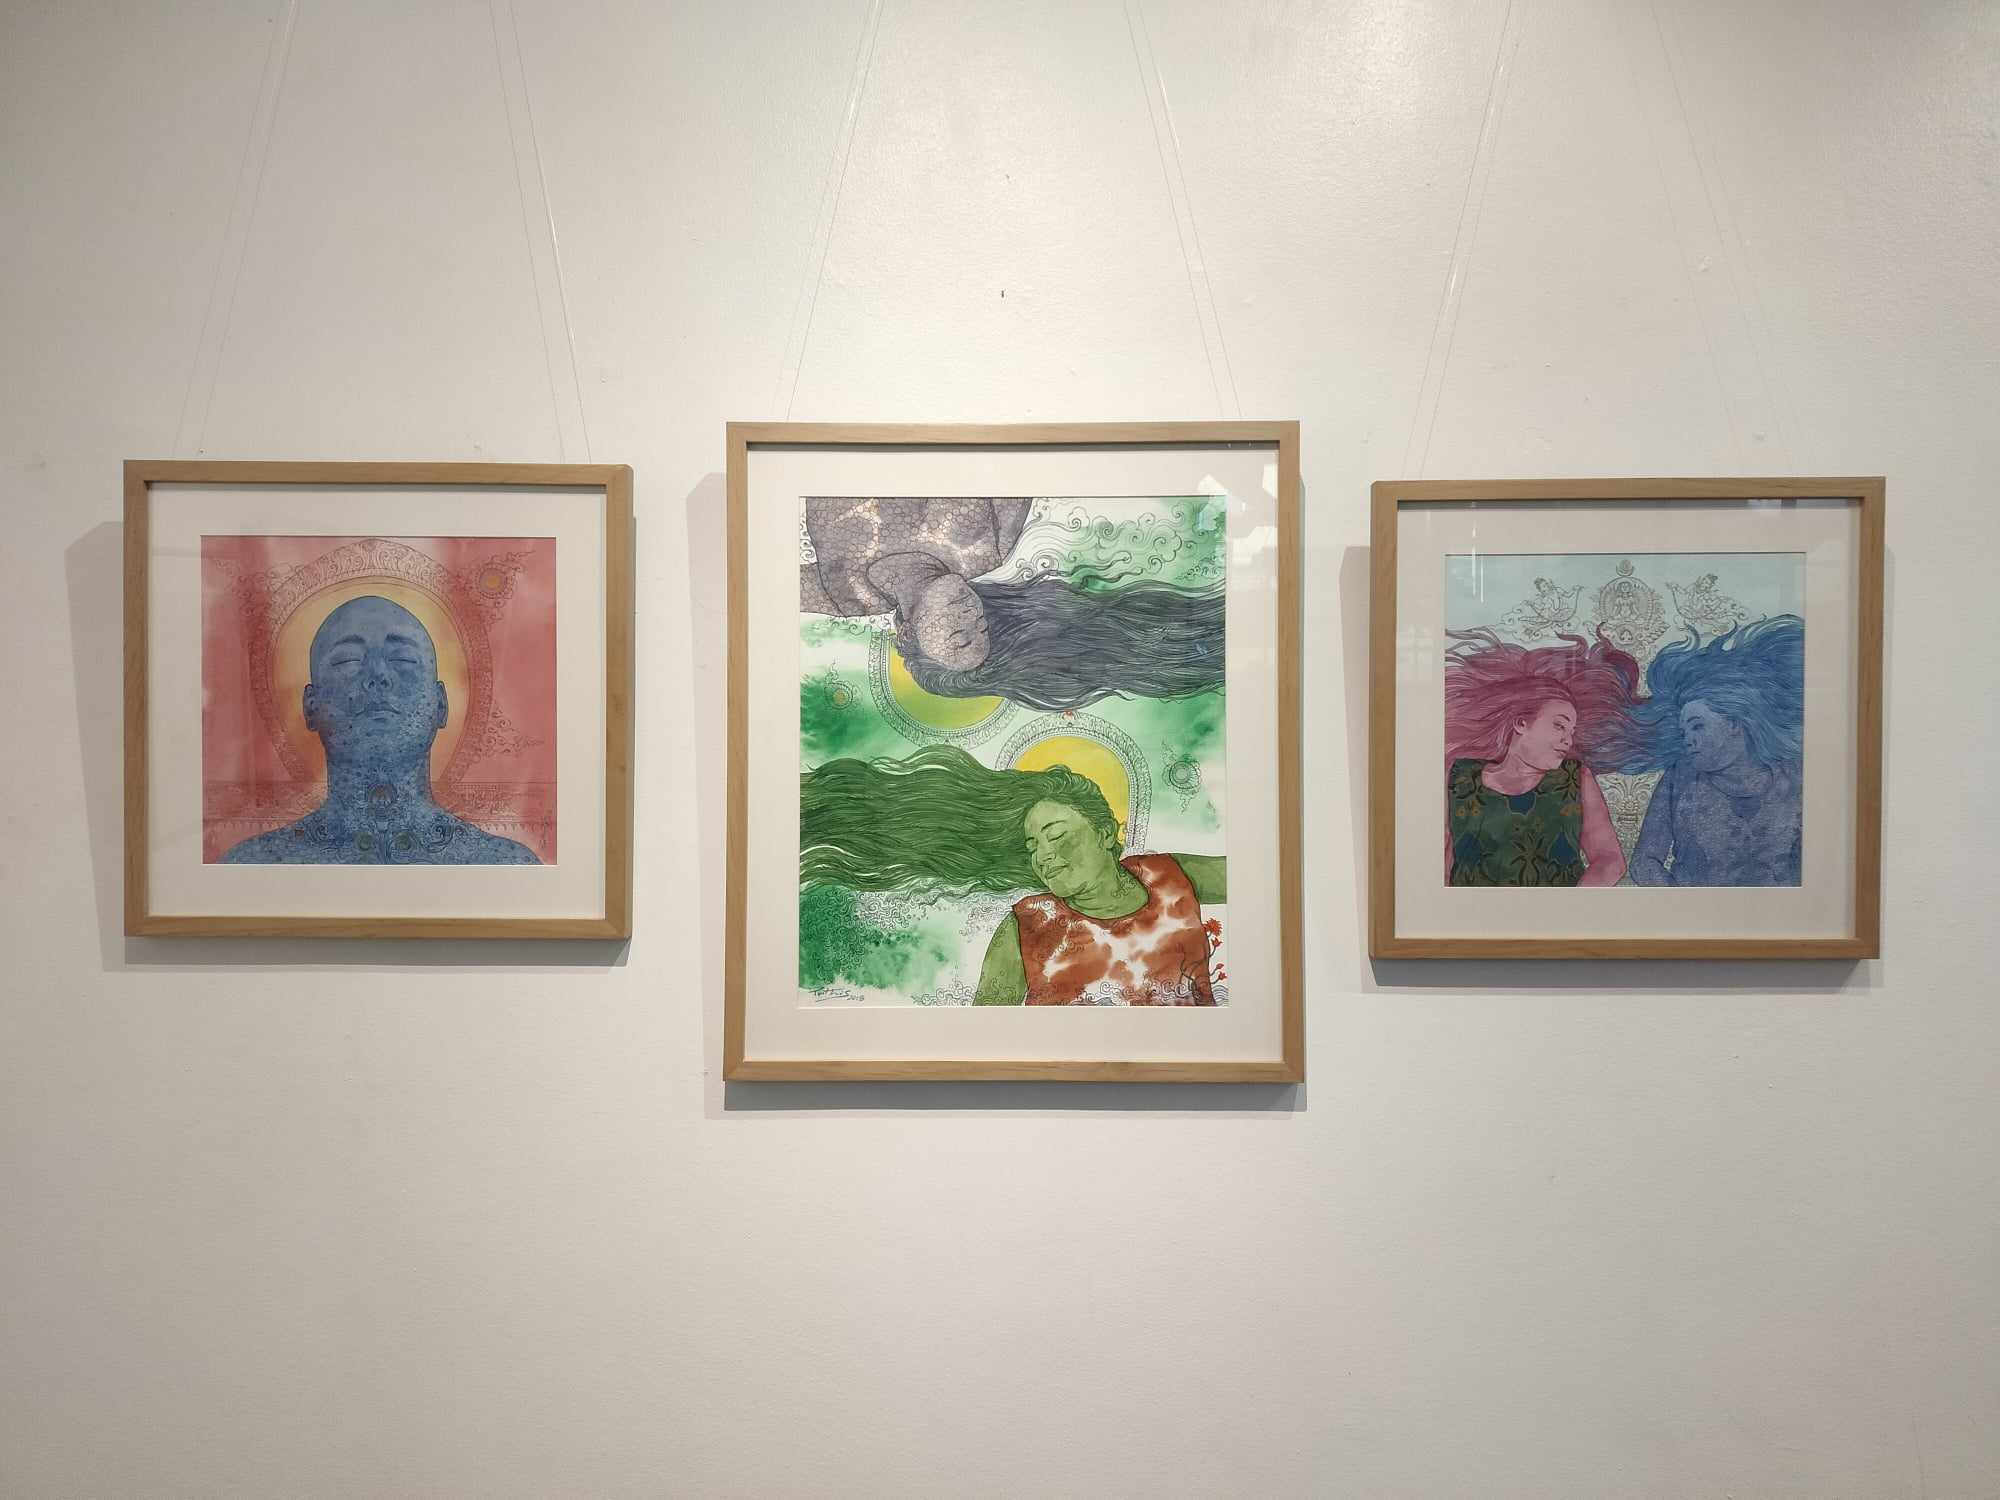 Water colour  series by Prithvi Shrestha at the exhibition Flowing Together  at Gallery Mcube, Patan.